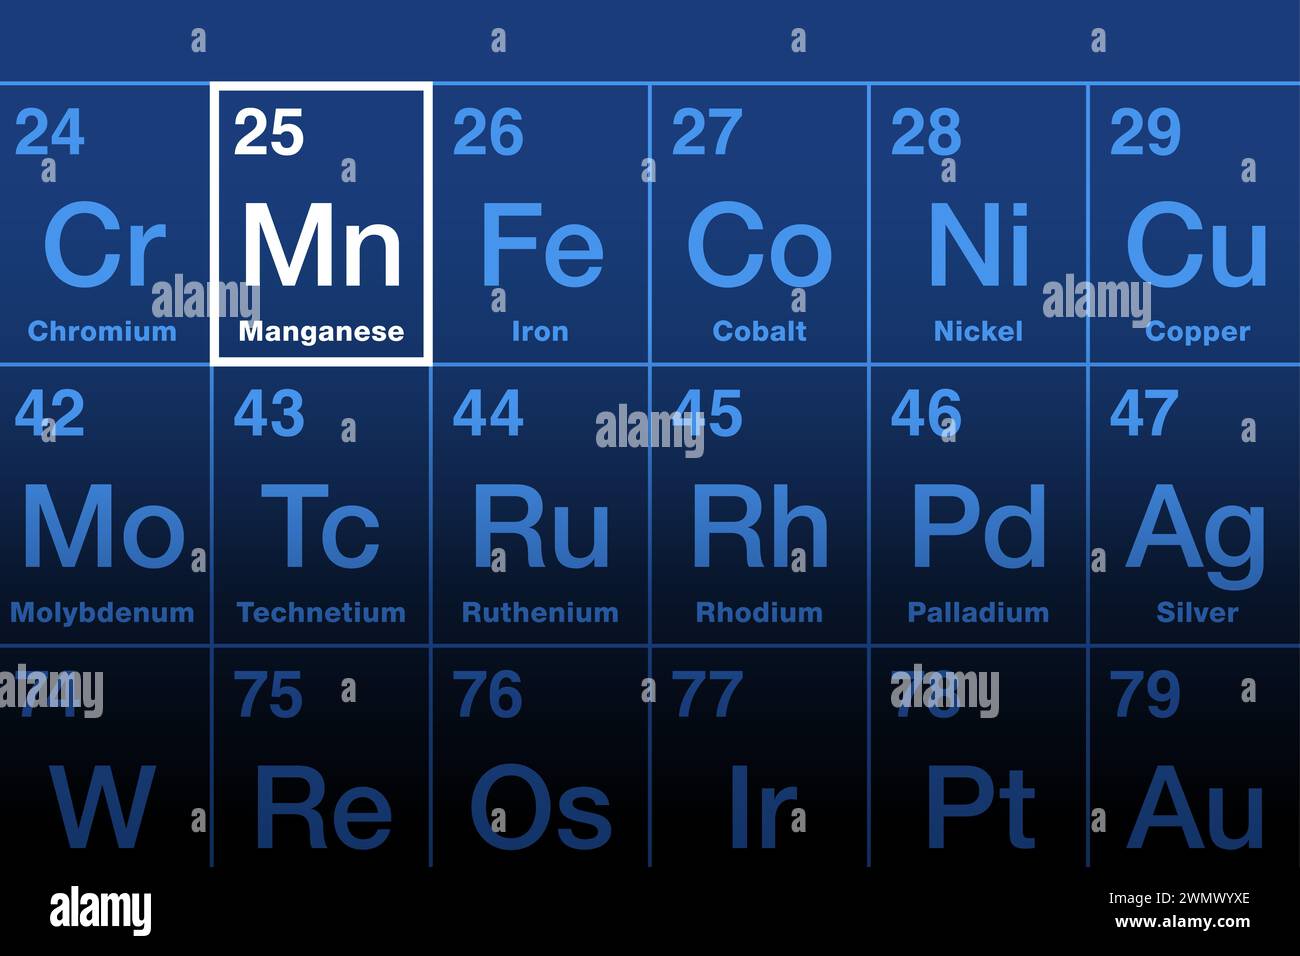 Manganese element on the periodic table. Transition metal and chemical element with symbol Mn and atomic number 25. Used for steel production. Stock Photo